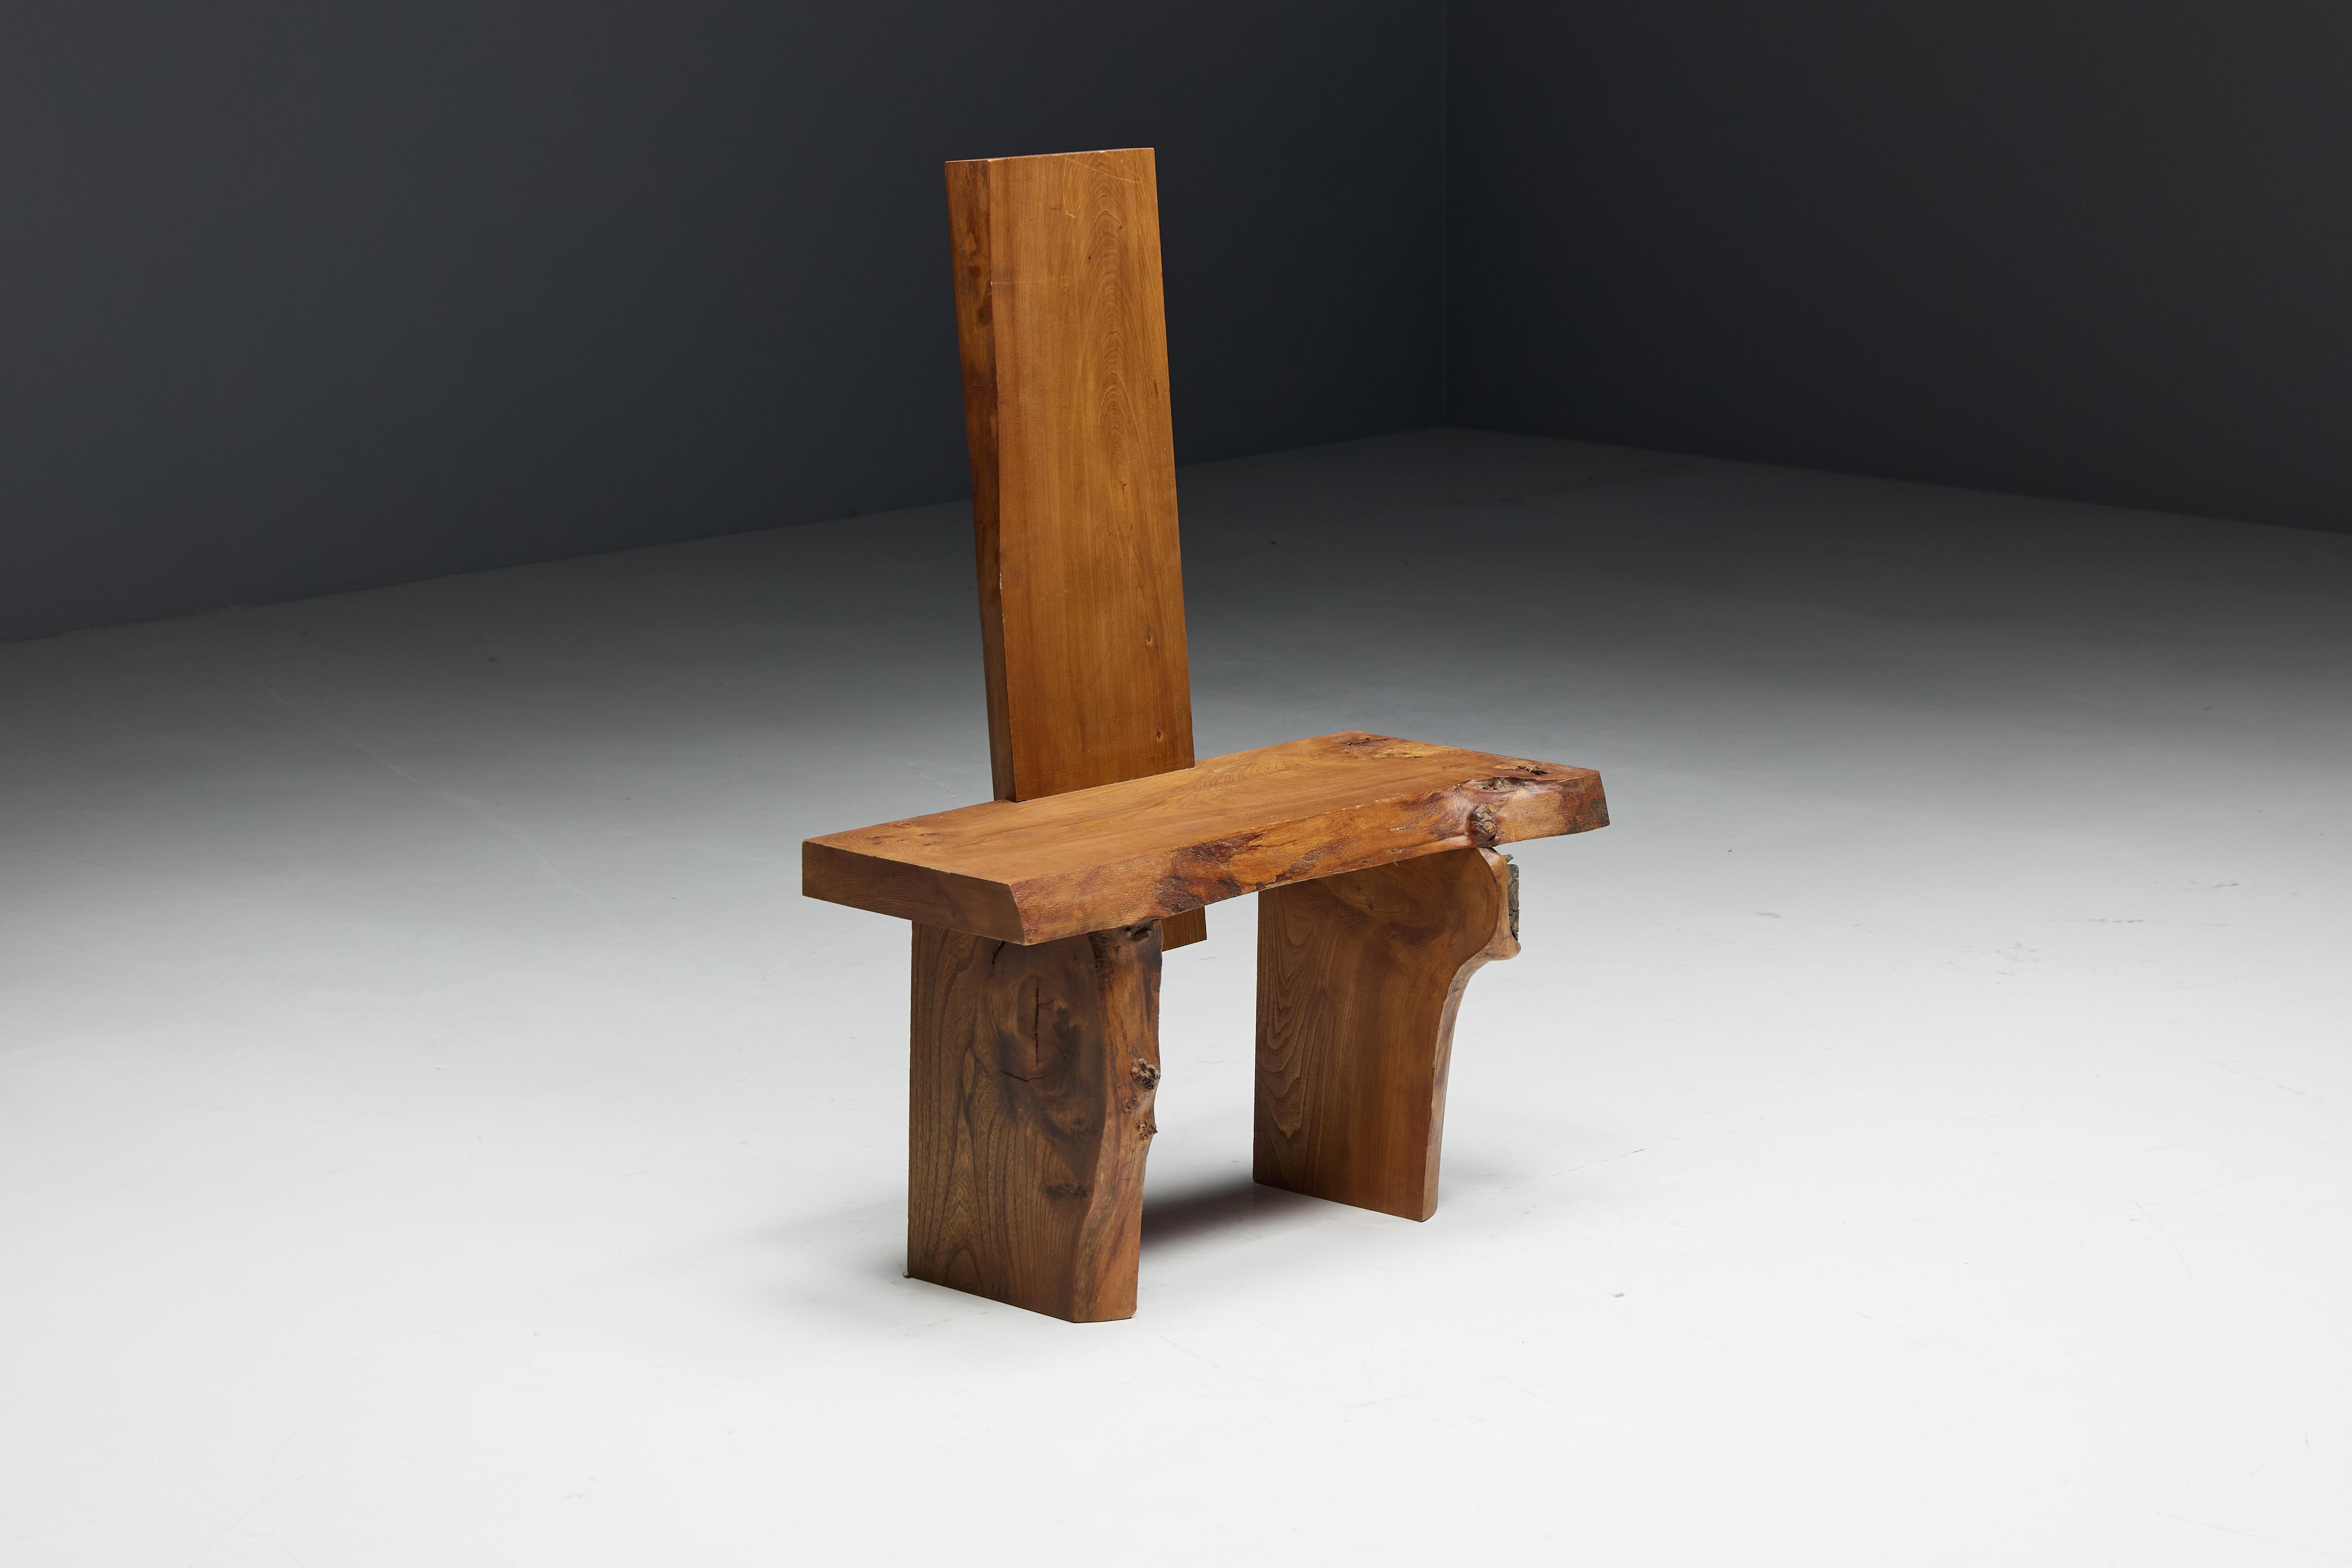 French Brutalist Monoxylite Chair, France, 1950s For Sale